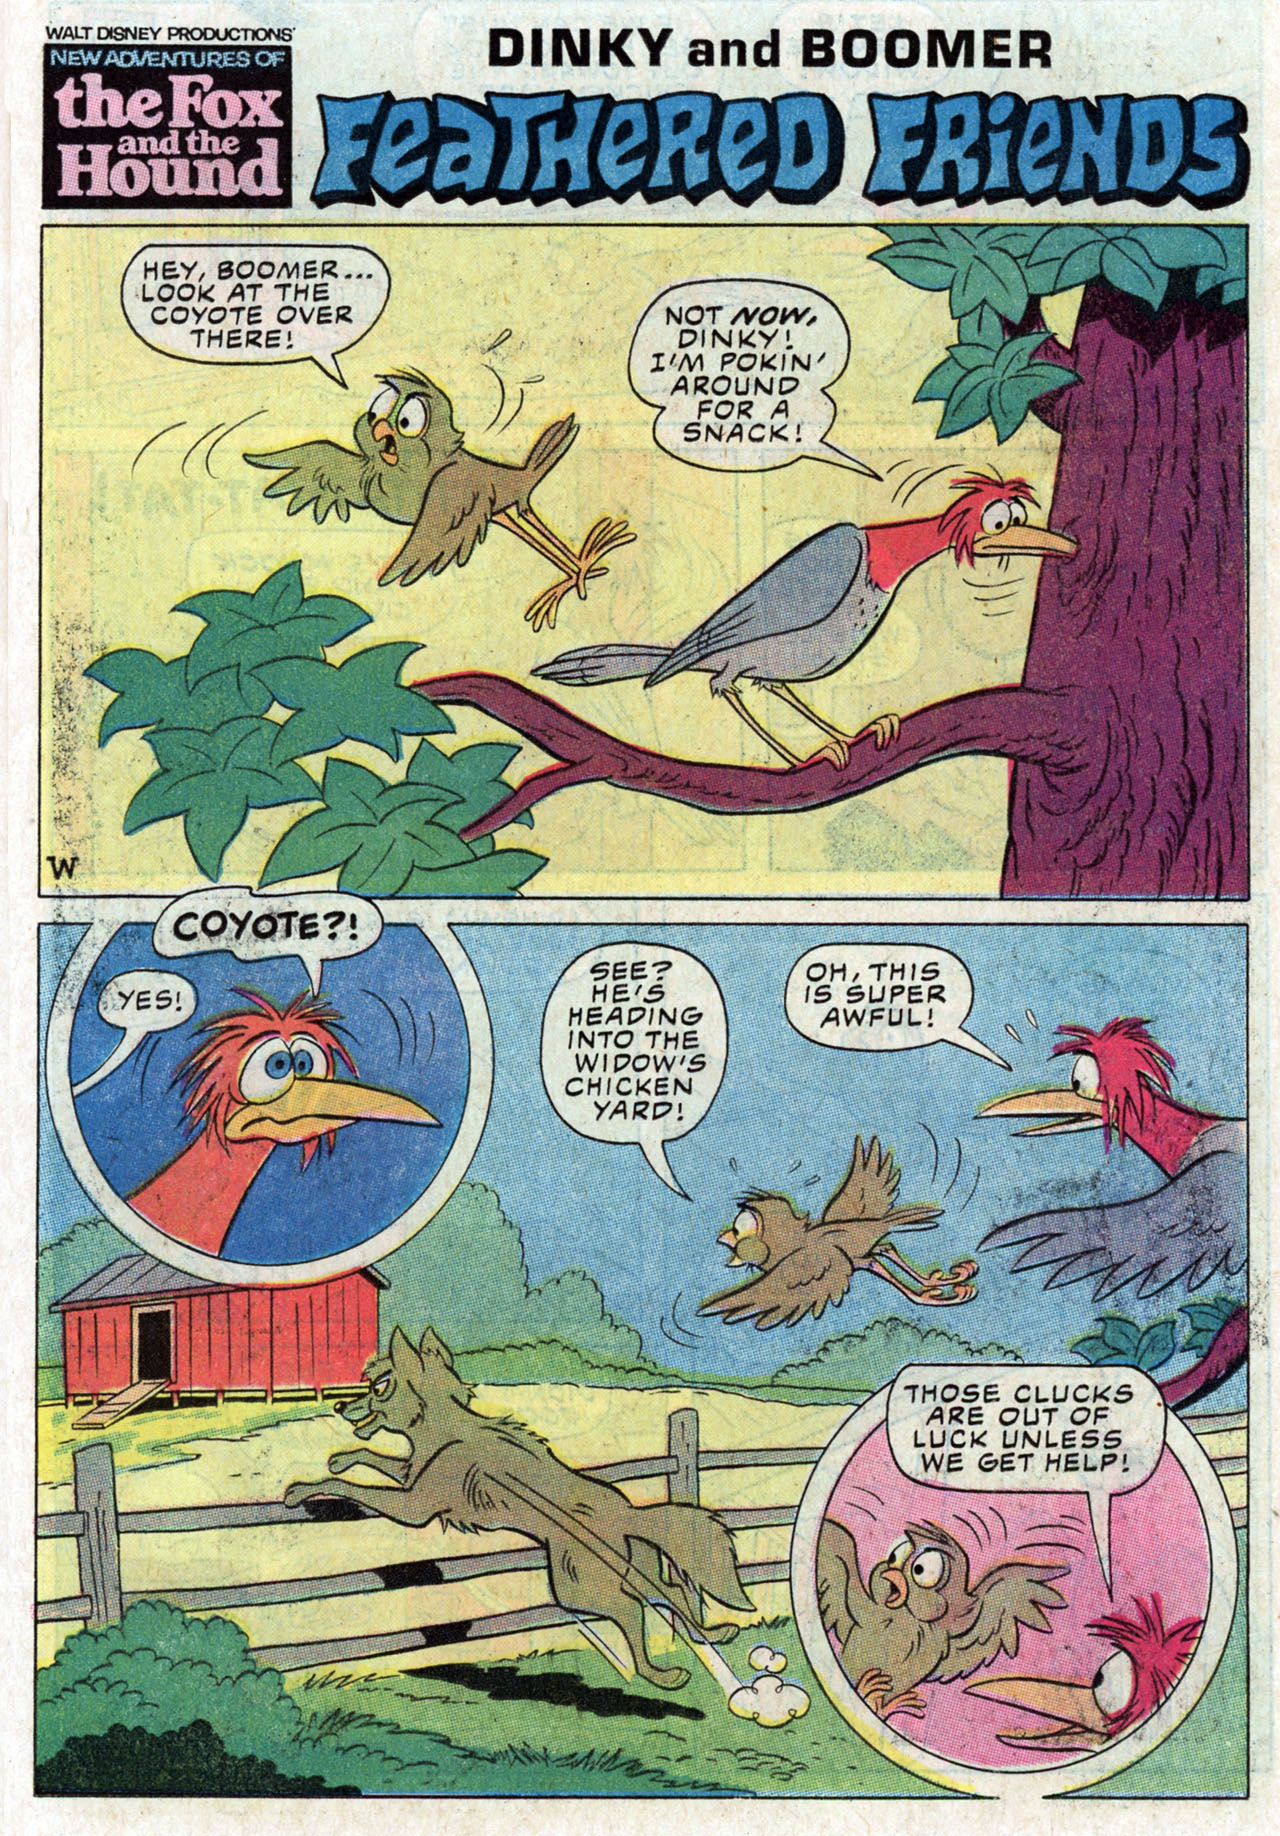 Read online Walt Disney Productions' The Fox and the Hound comic -  Issue #3 - 11